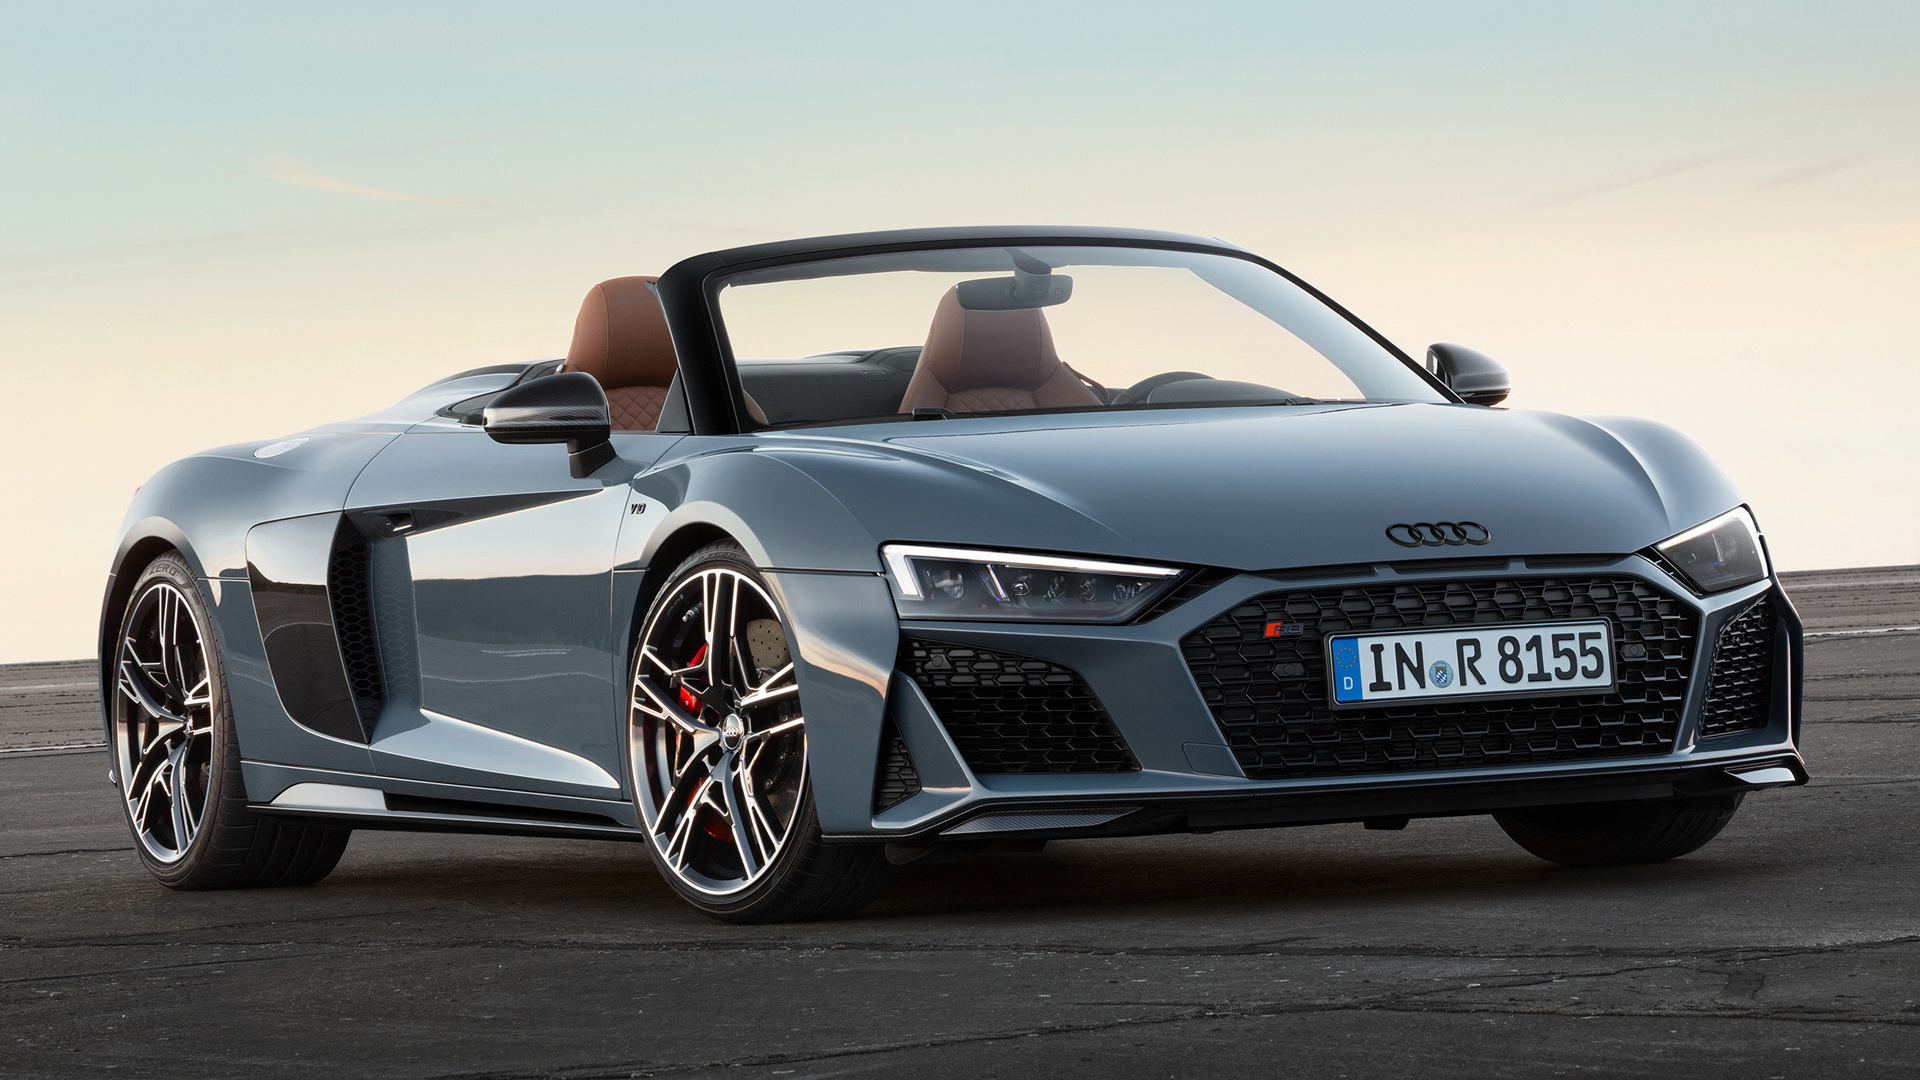 2019 Audi R8 Spyder Performance Wallpapers and HD Images